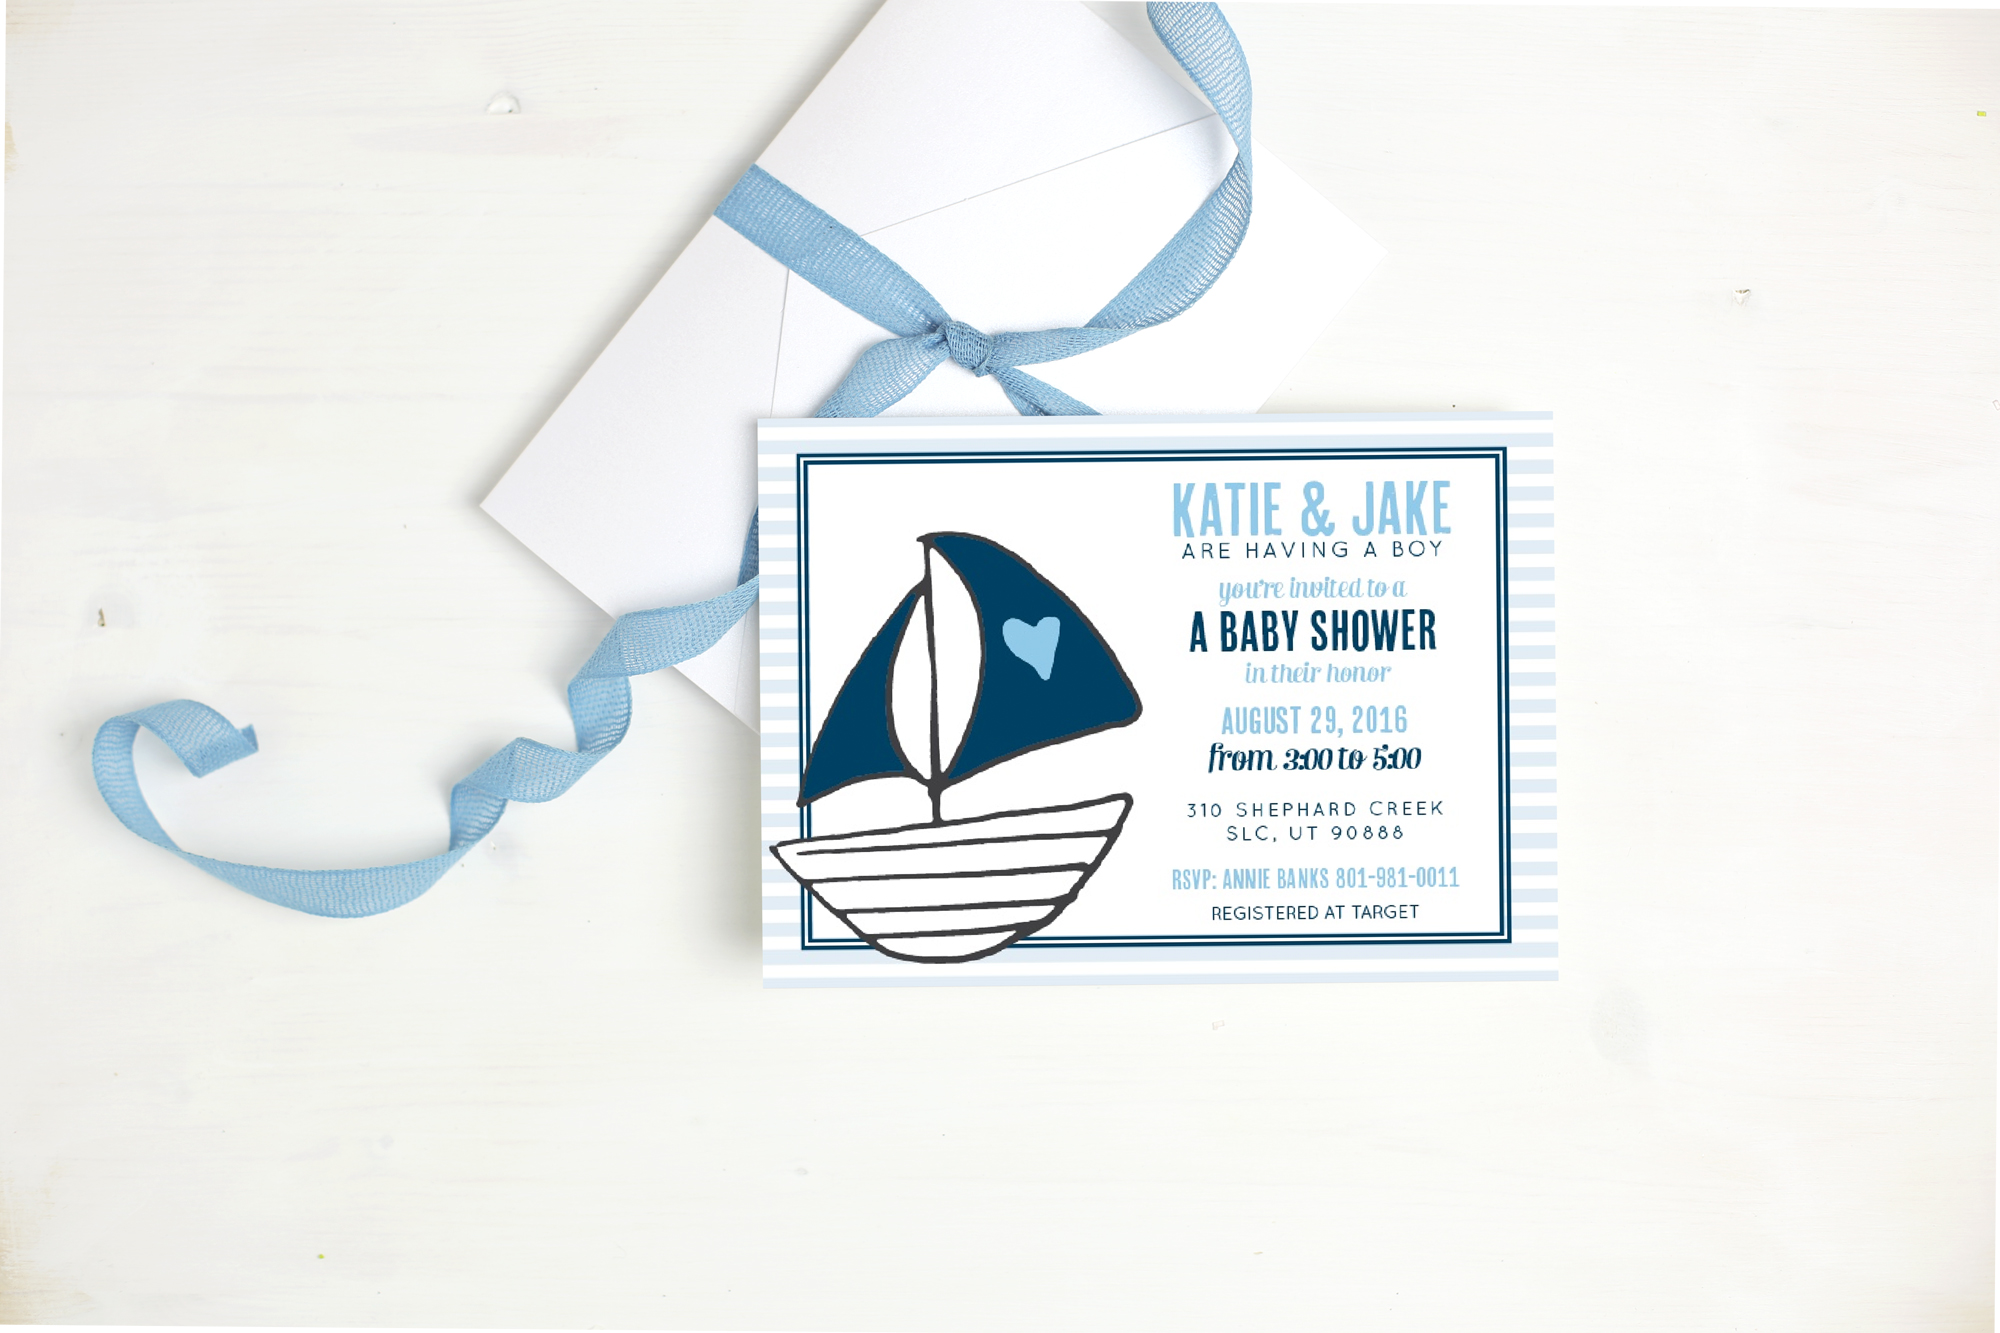 #BasicInvite #BabyShower #parties #party #ad